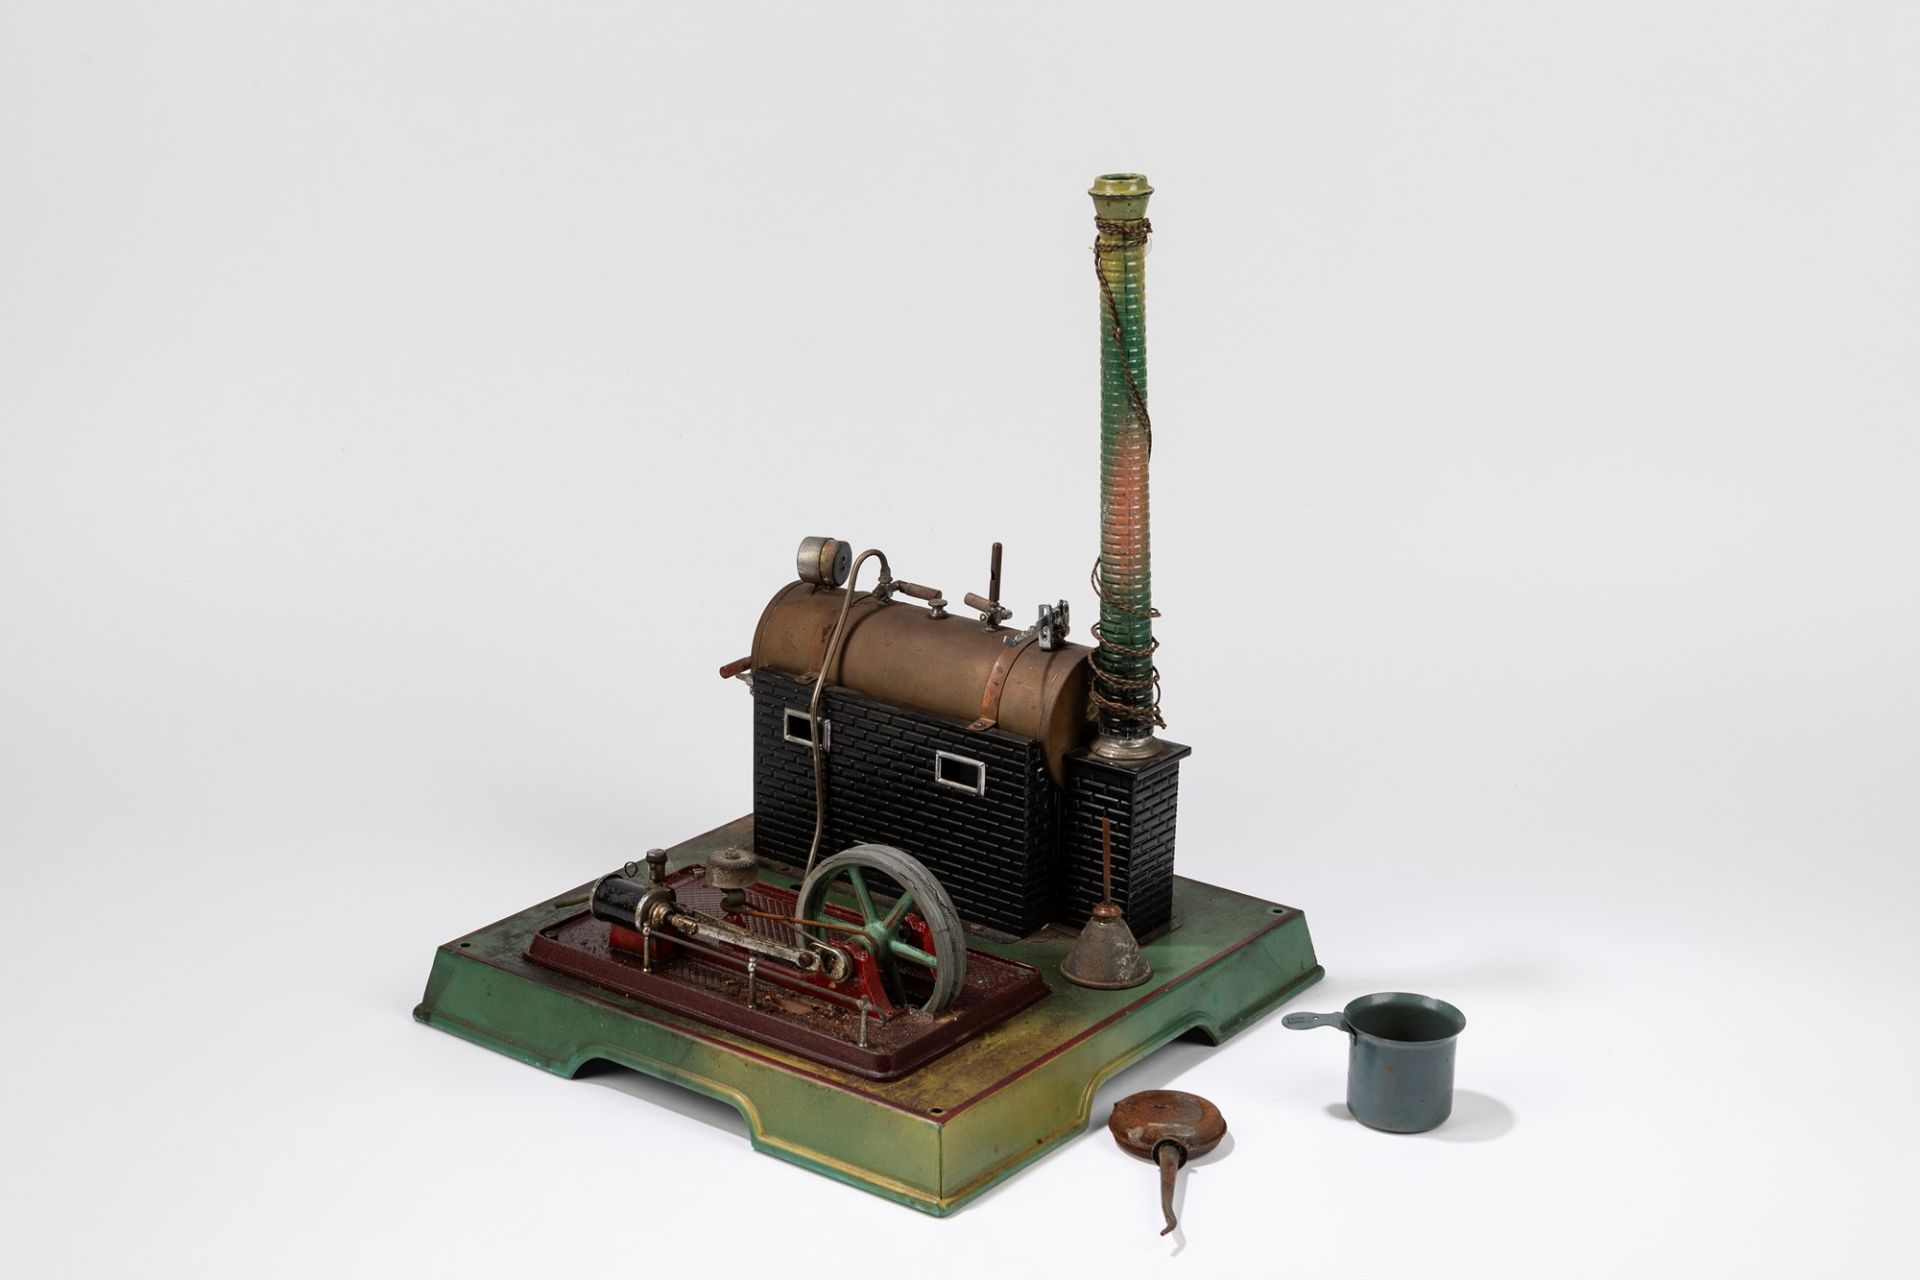 Marklin - Steam engine and two characters, 1930-1935 - Image 2 of 3